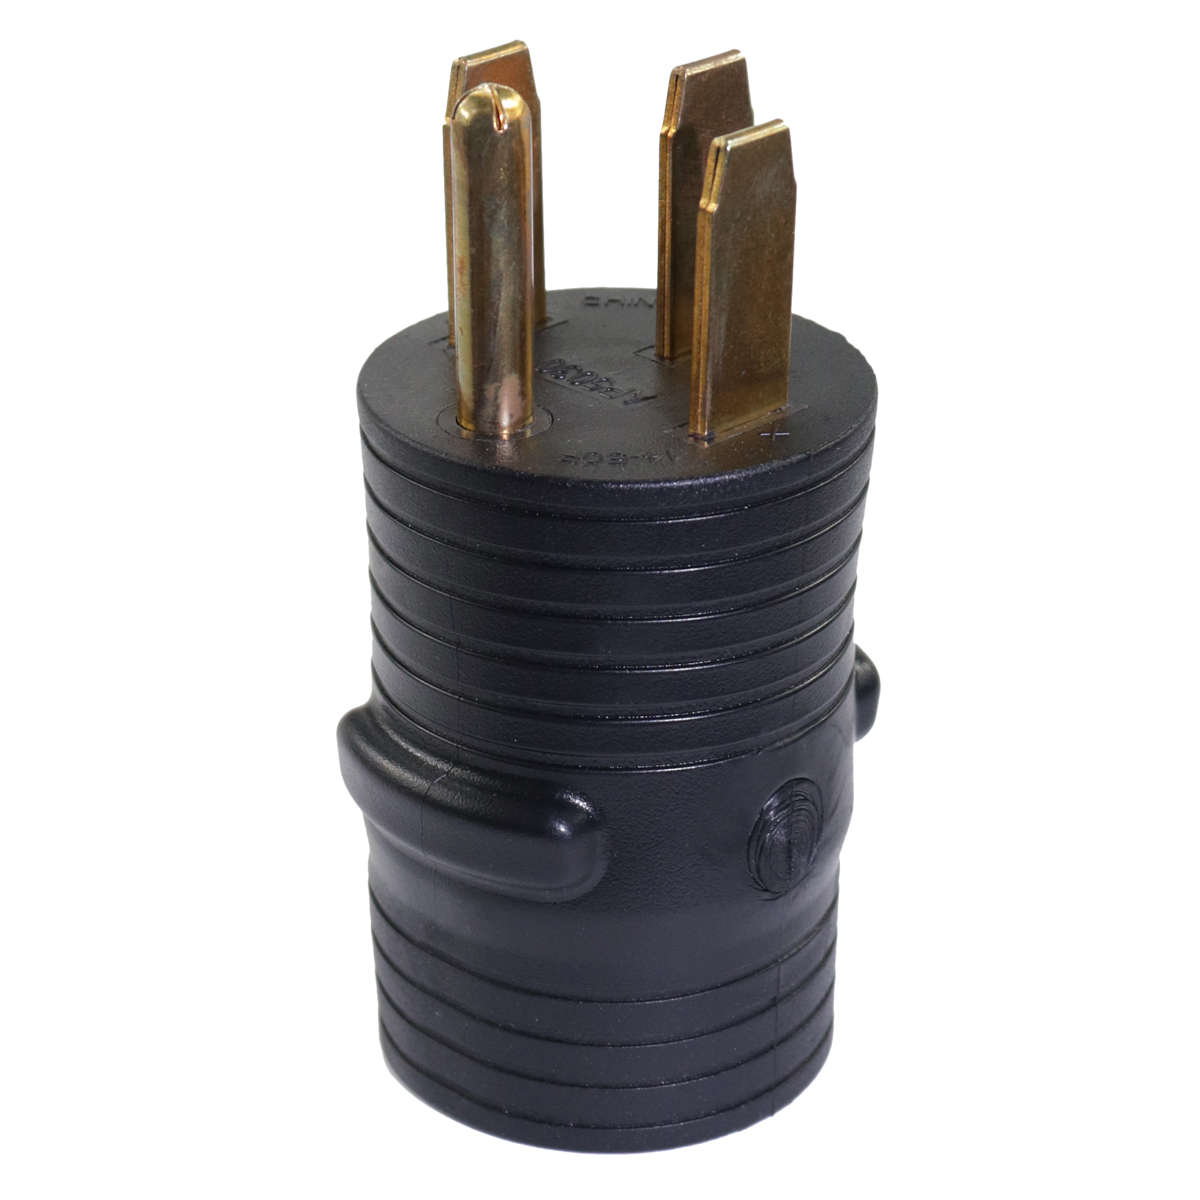 RV-Electrical-Locking-Adapter-50A-Male-to-30A-Female-Locking-Plug-Connector-1403285-6